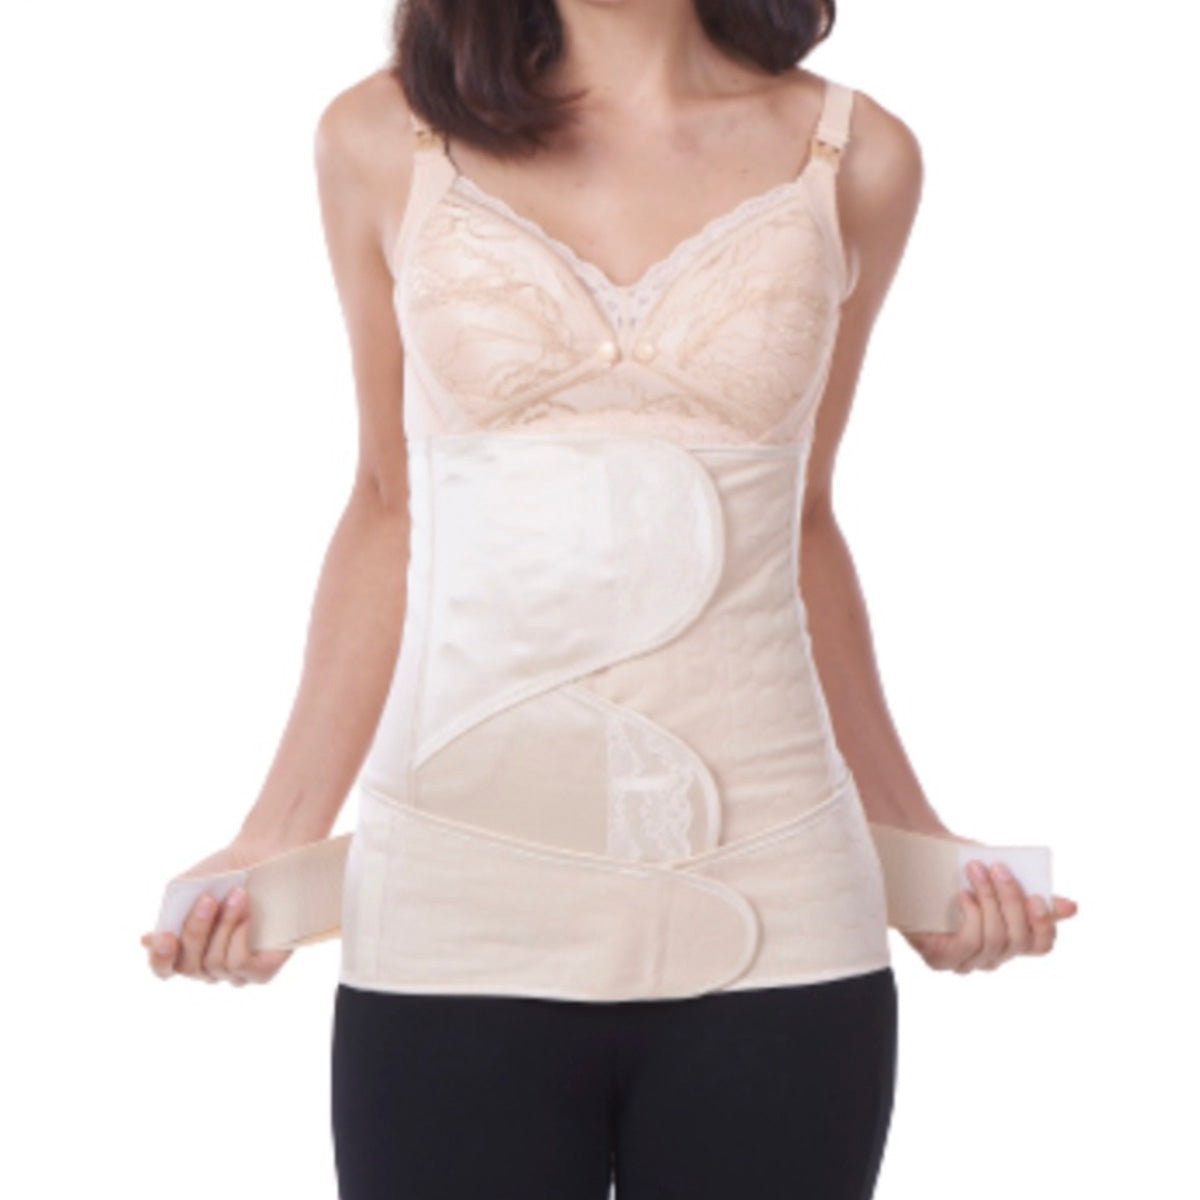 Bmama 2 in 1 Belly and Pelvic Binder Set -Golden Girdle